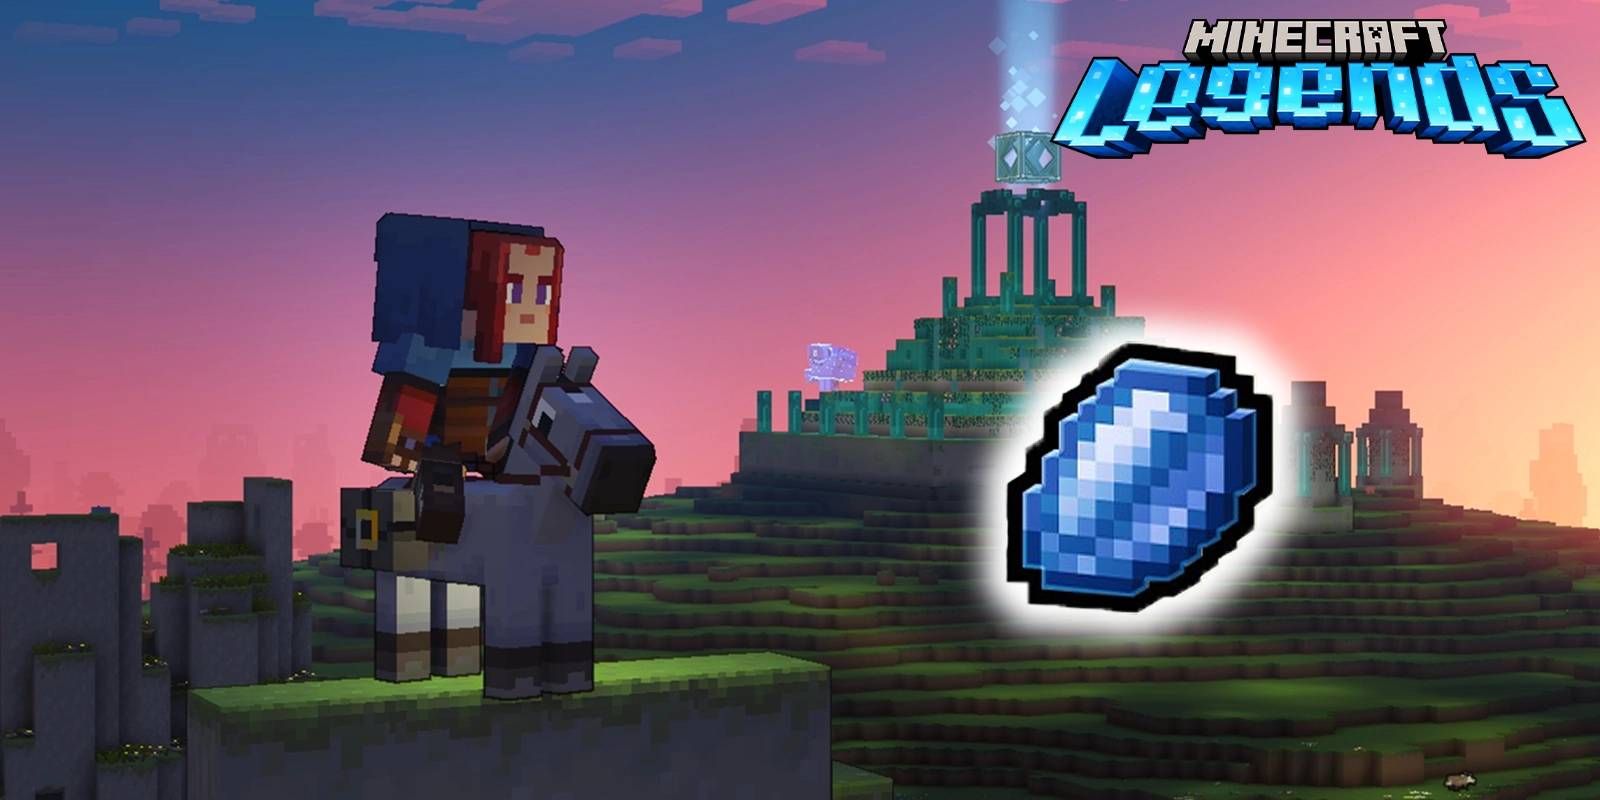 Minecraft Legends Lapis Lazuli Resource Used to Make Mobs and Golems